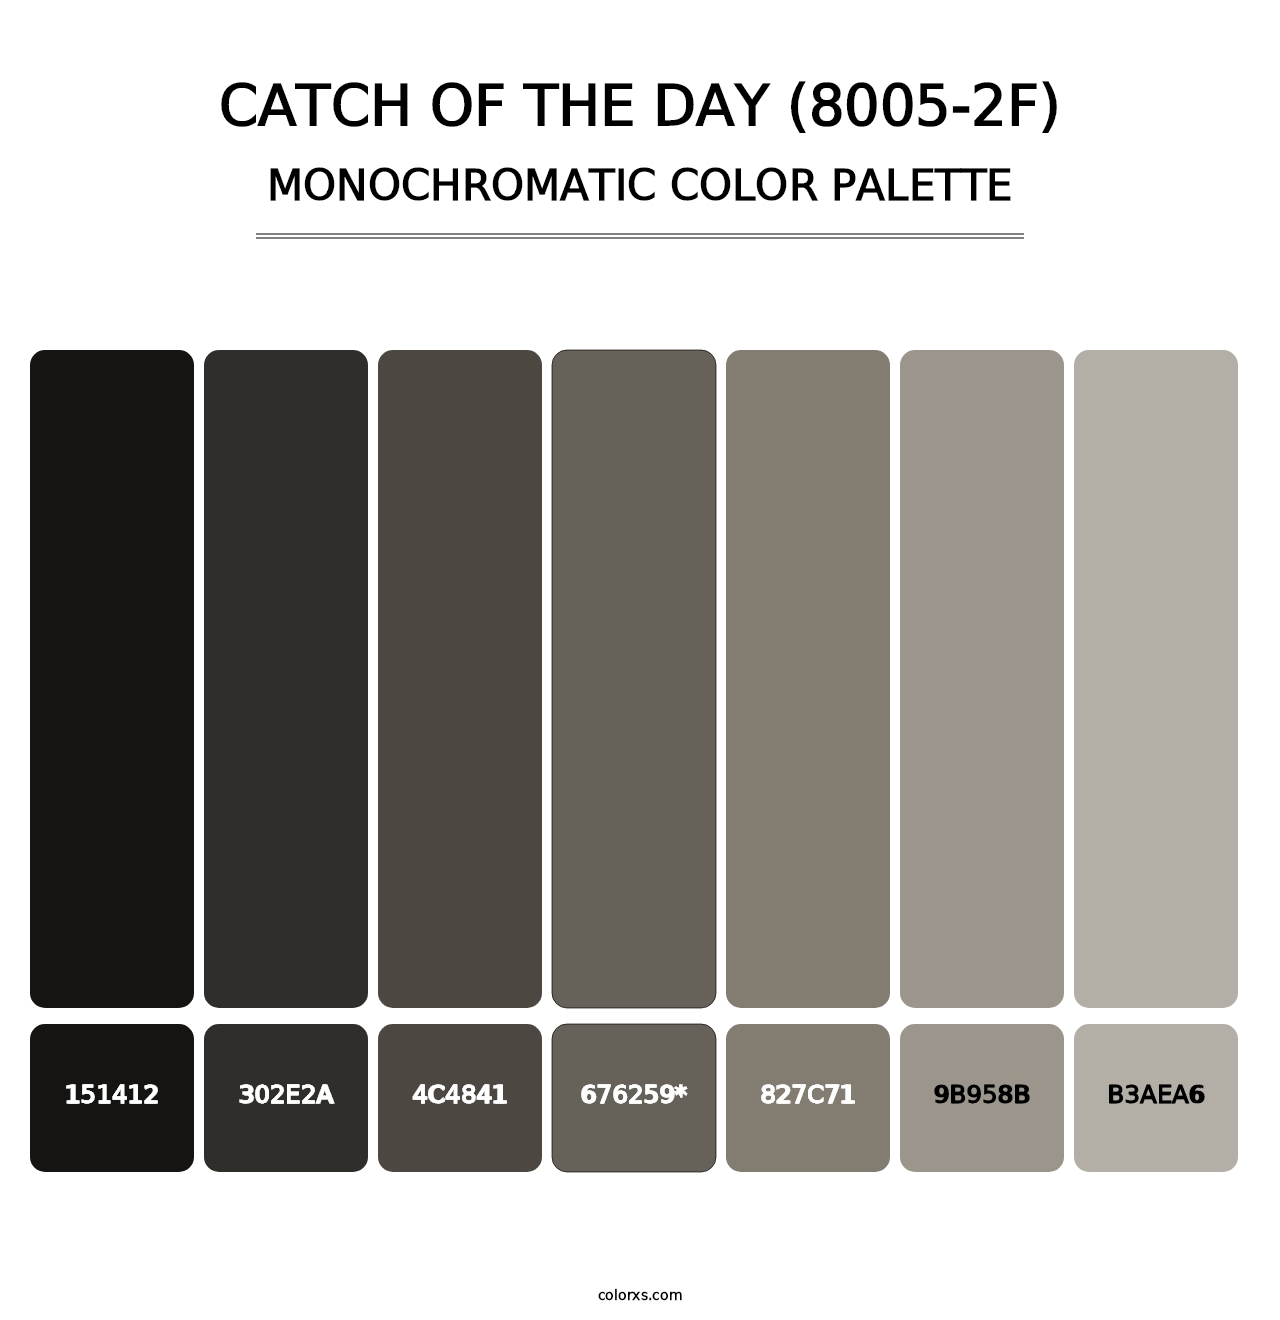 Catch of the Day (8005-2F) - Monochromatic Color Palette